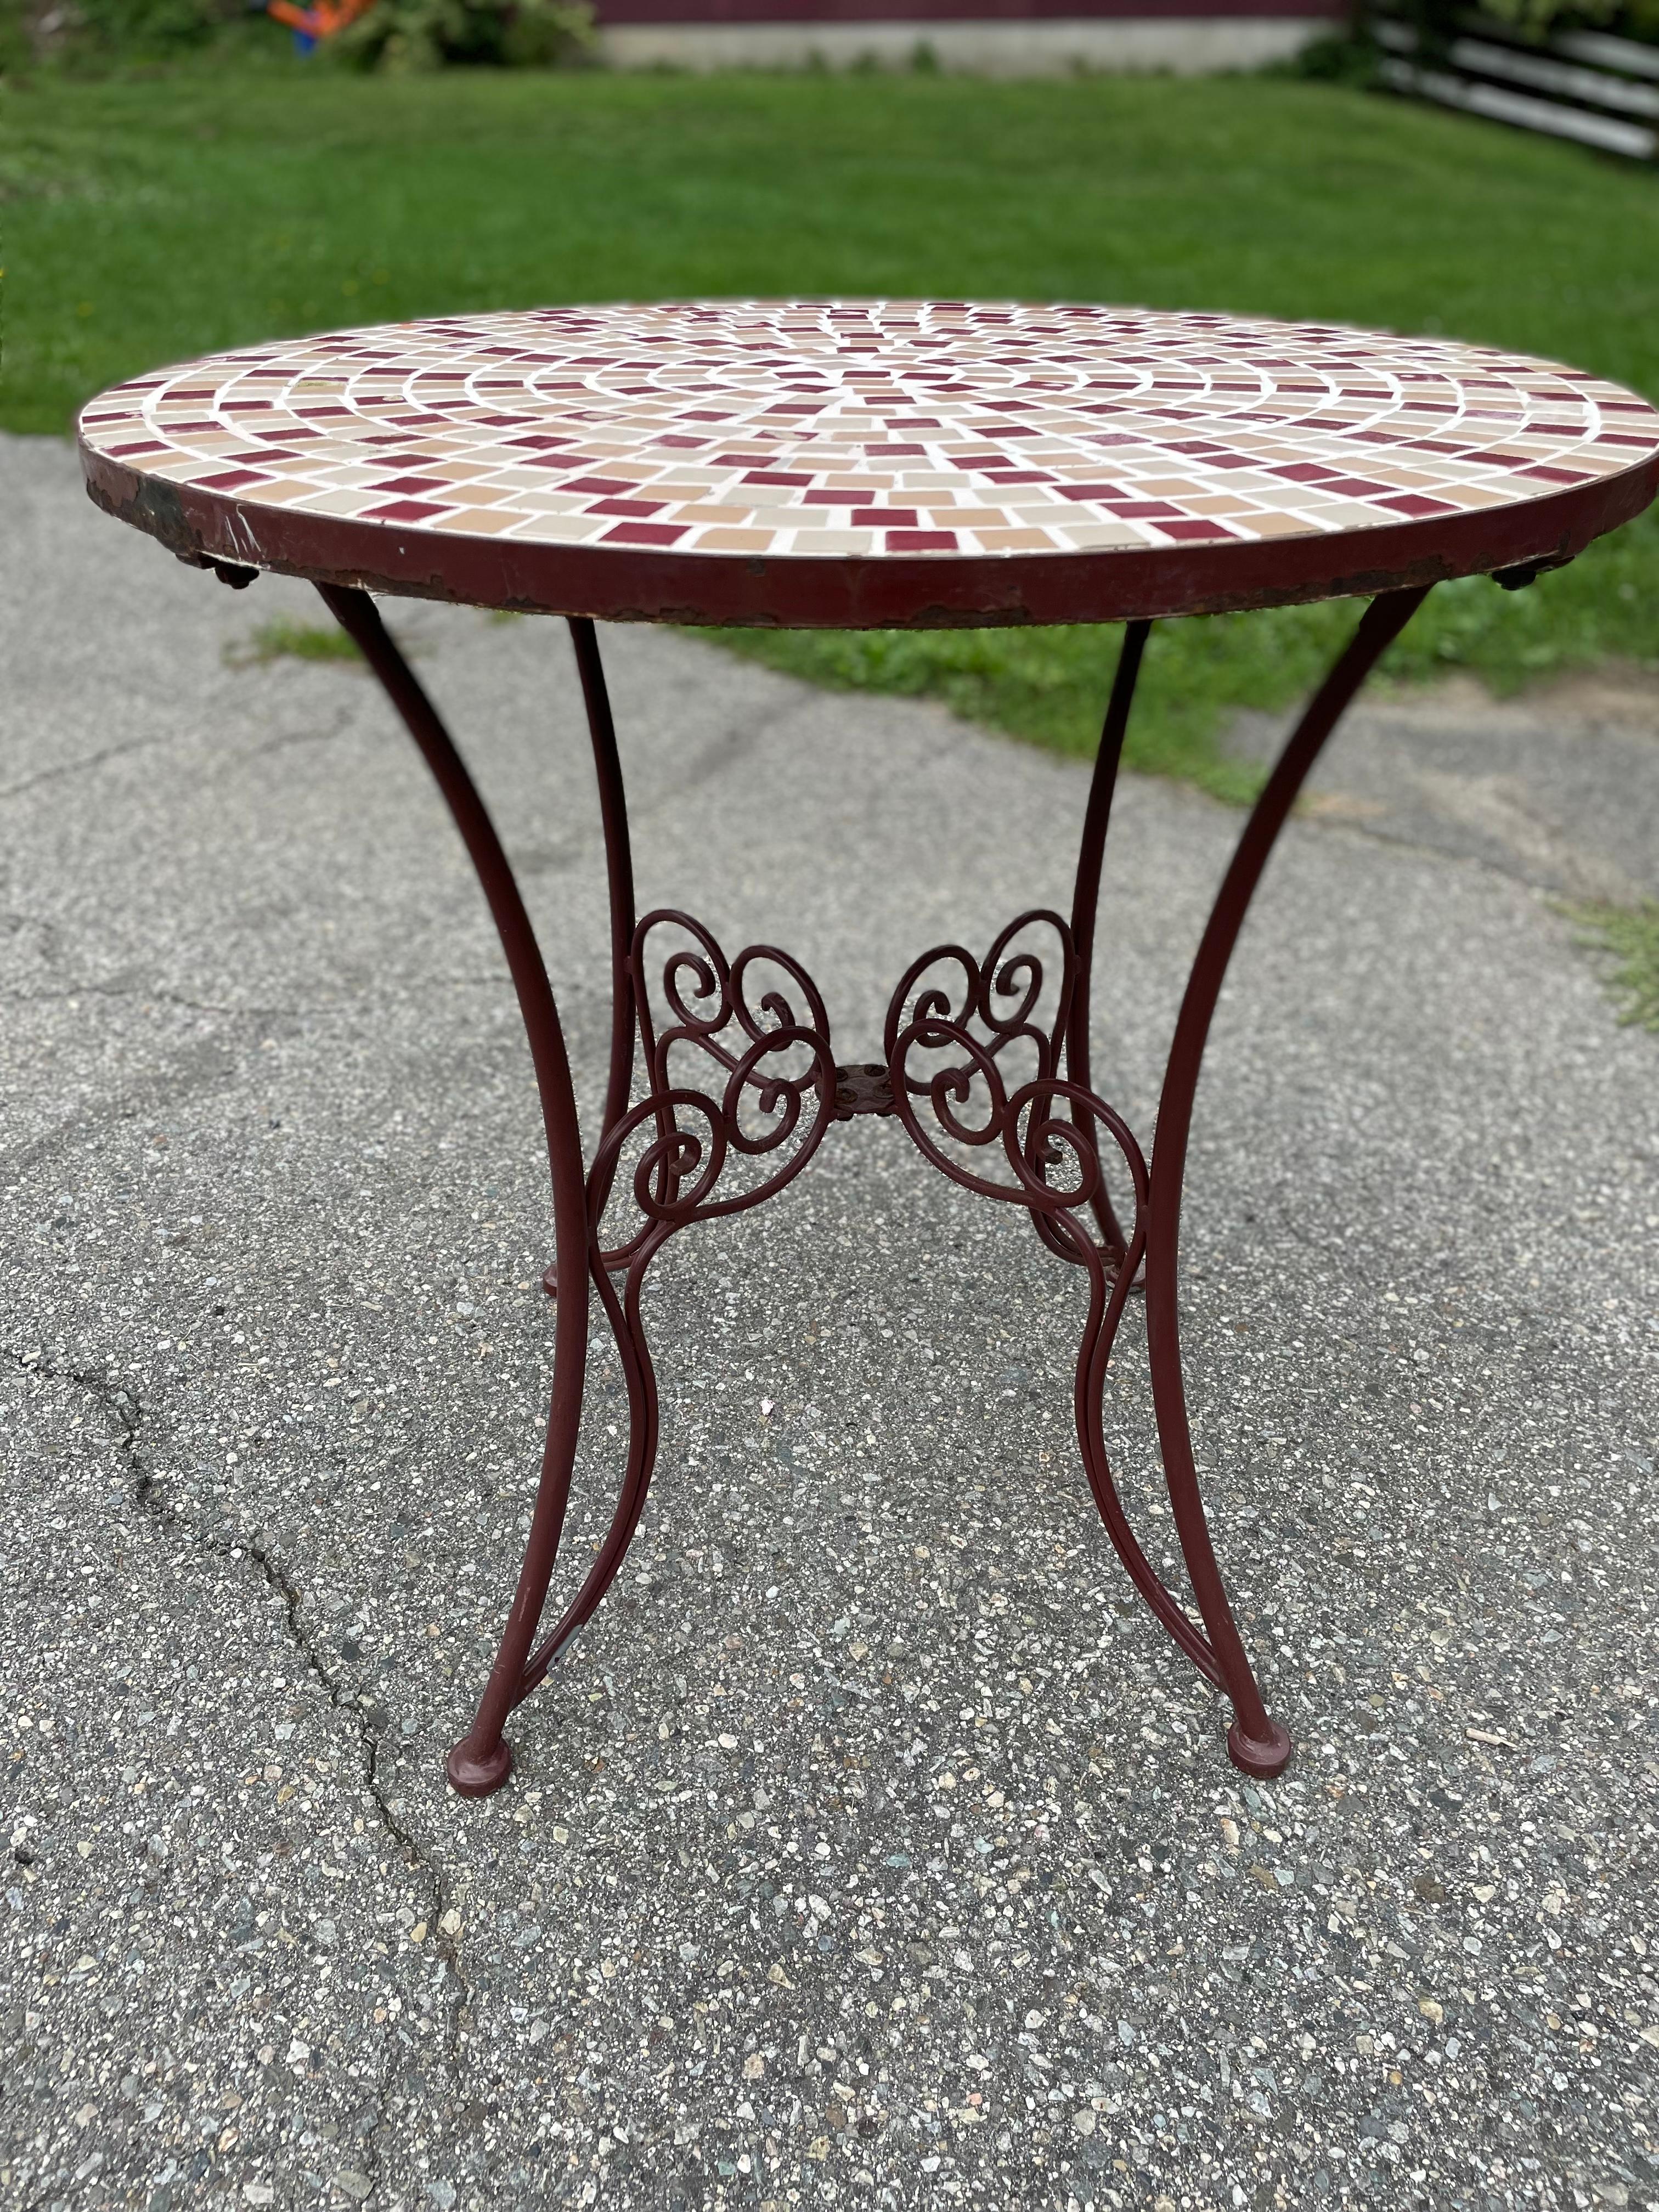 Mid-Century Modern Vintage Mosaic a Tile Top Table For Sale